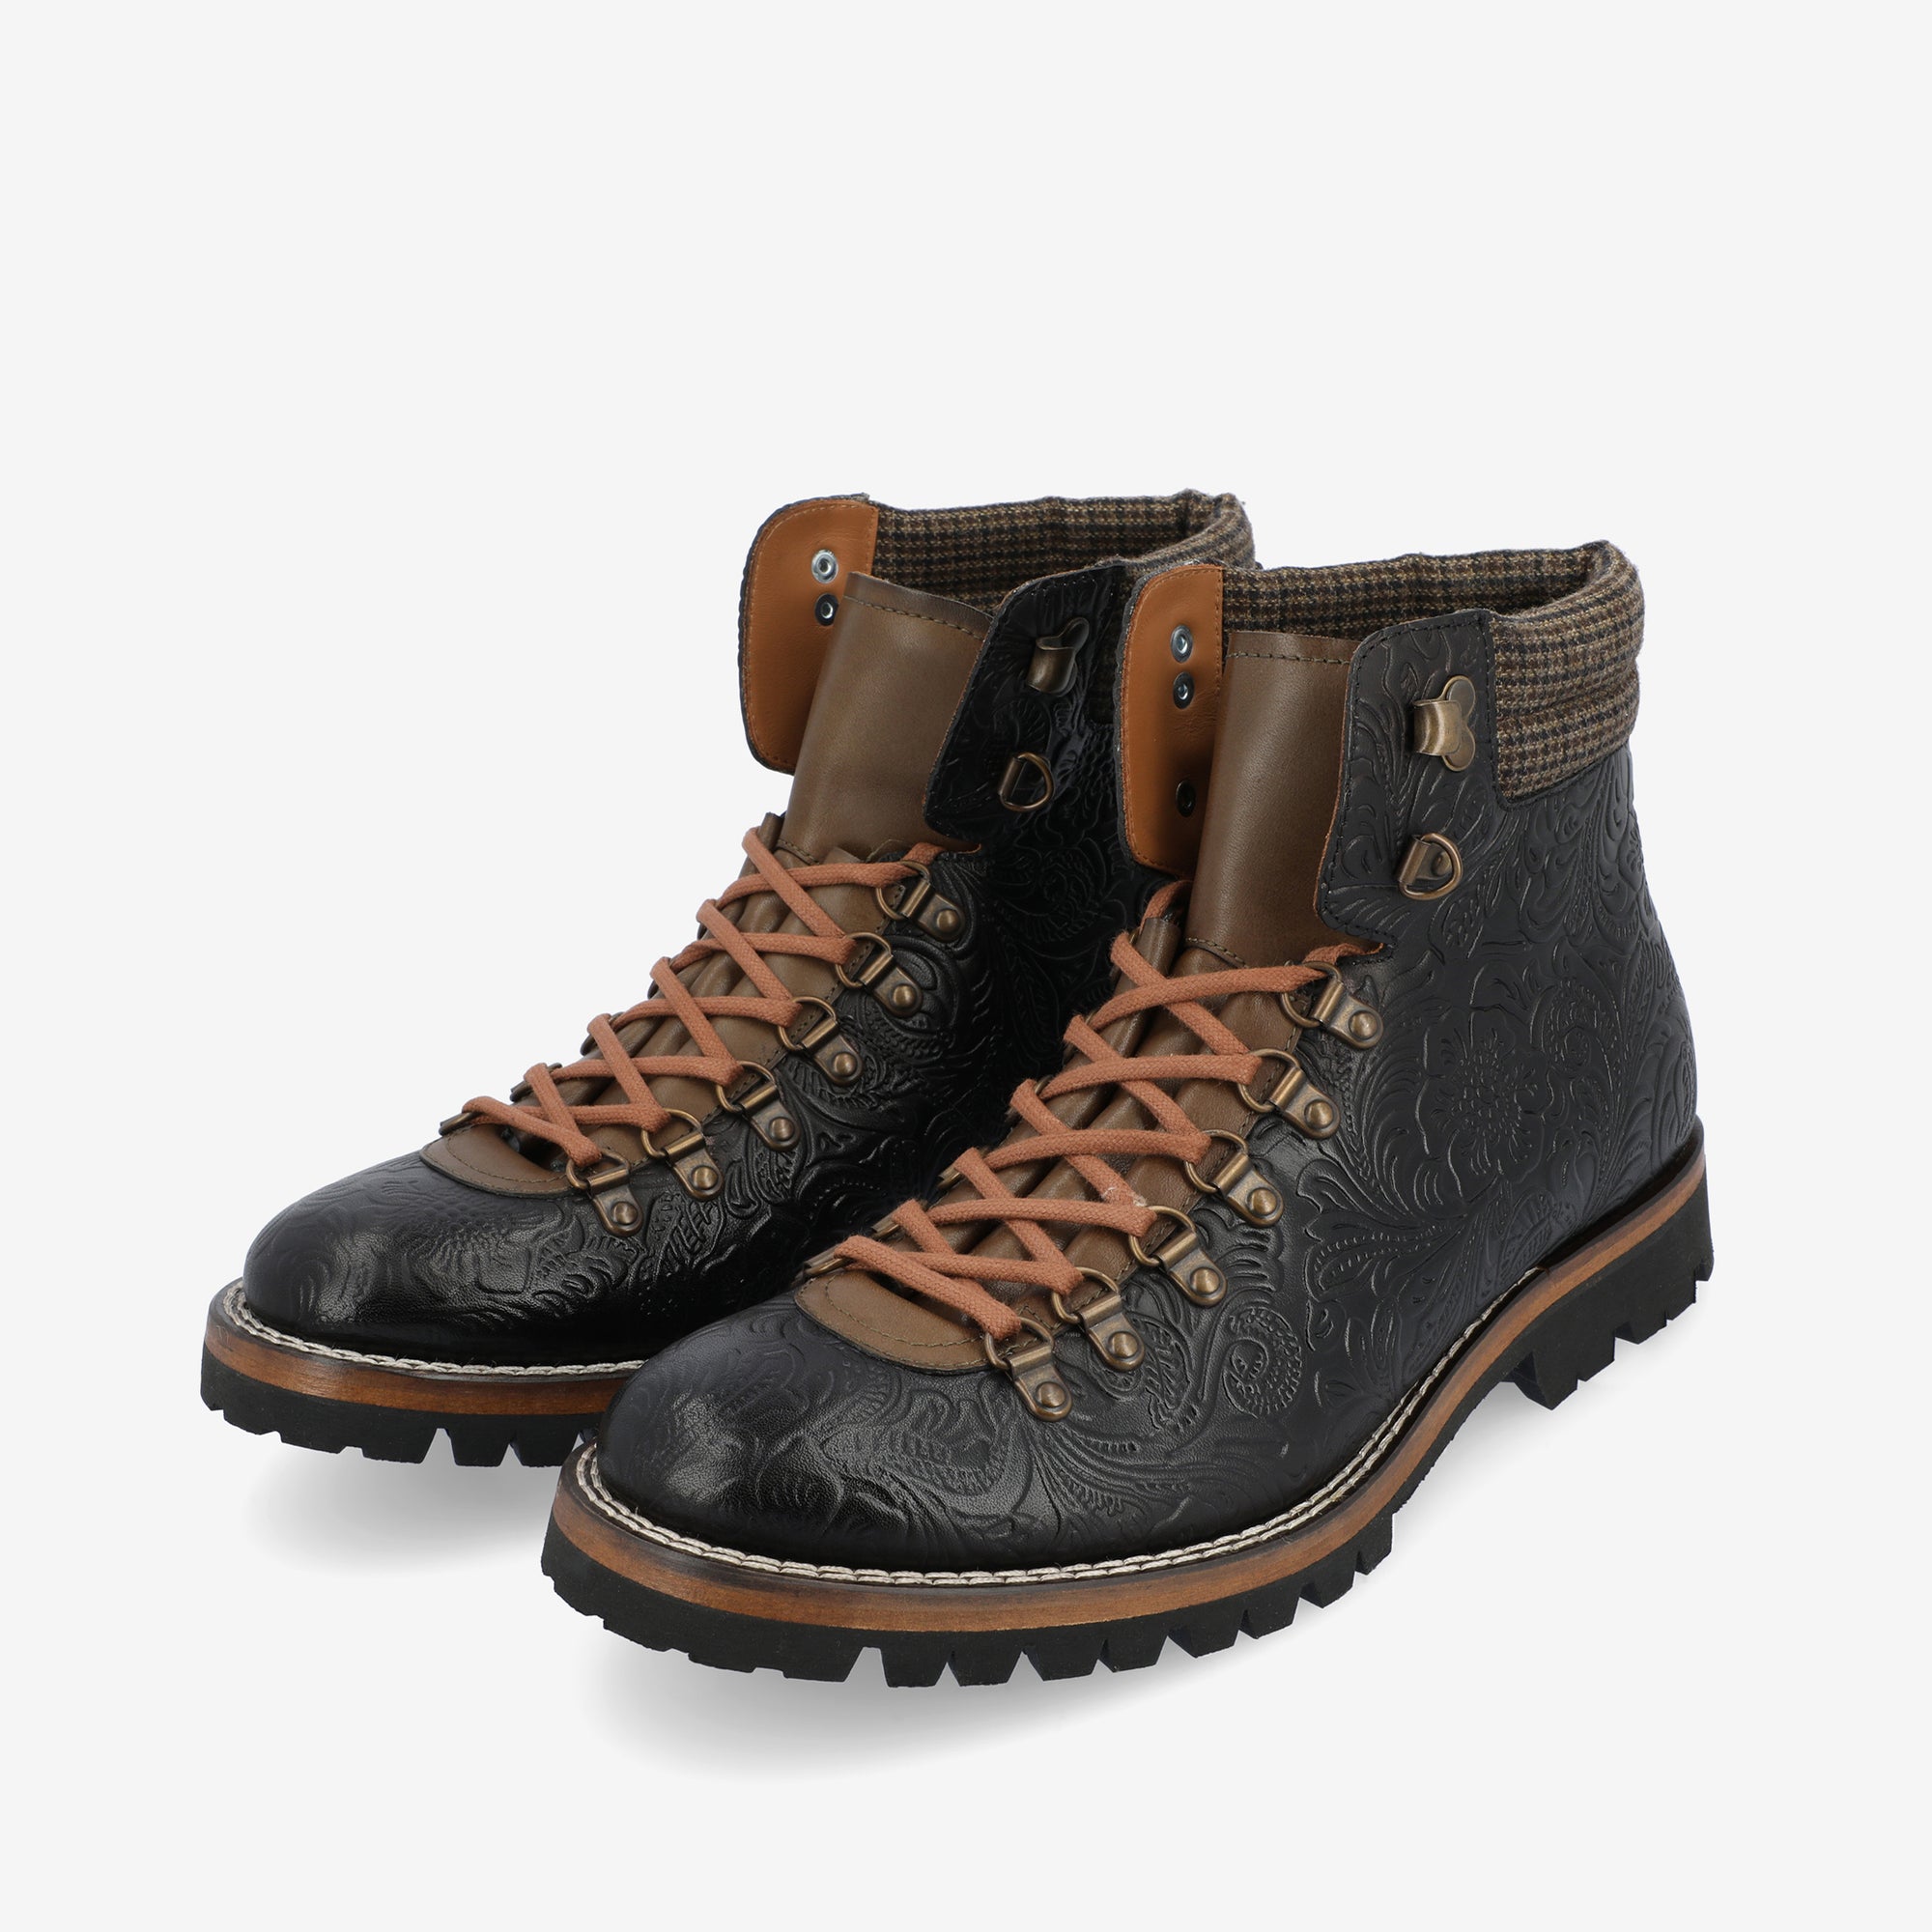 The Viking Boot in Black Floral (Last Chance, Final Sale)